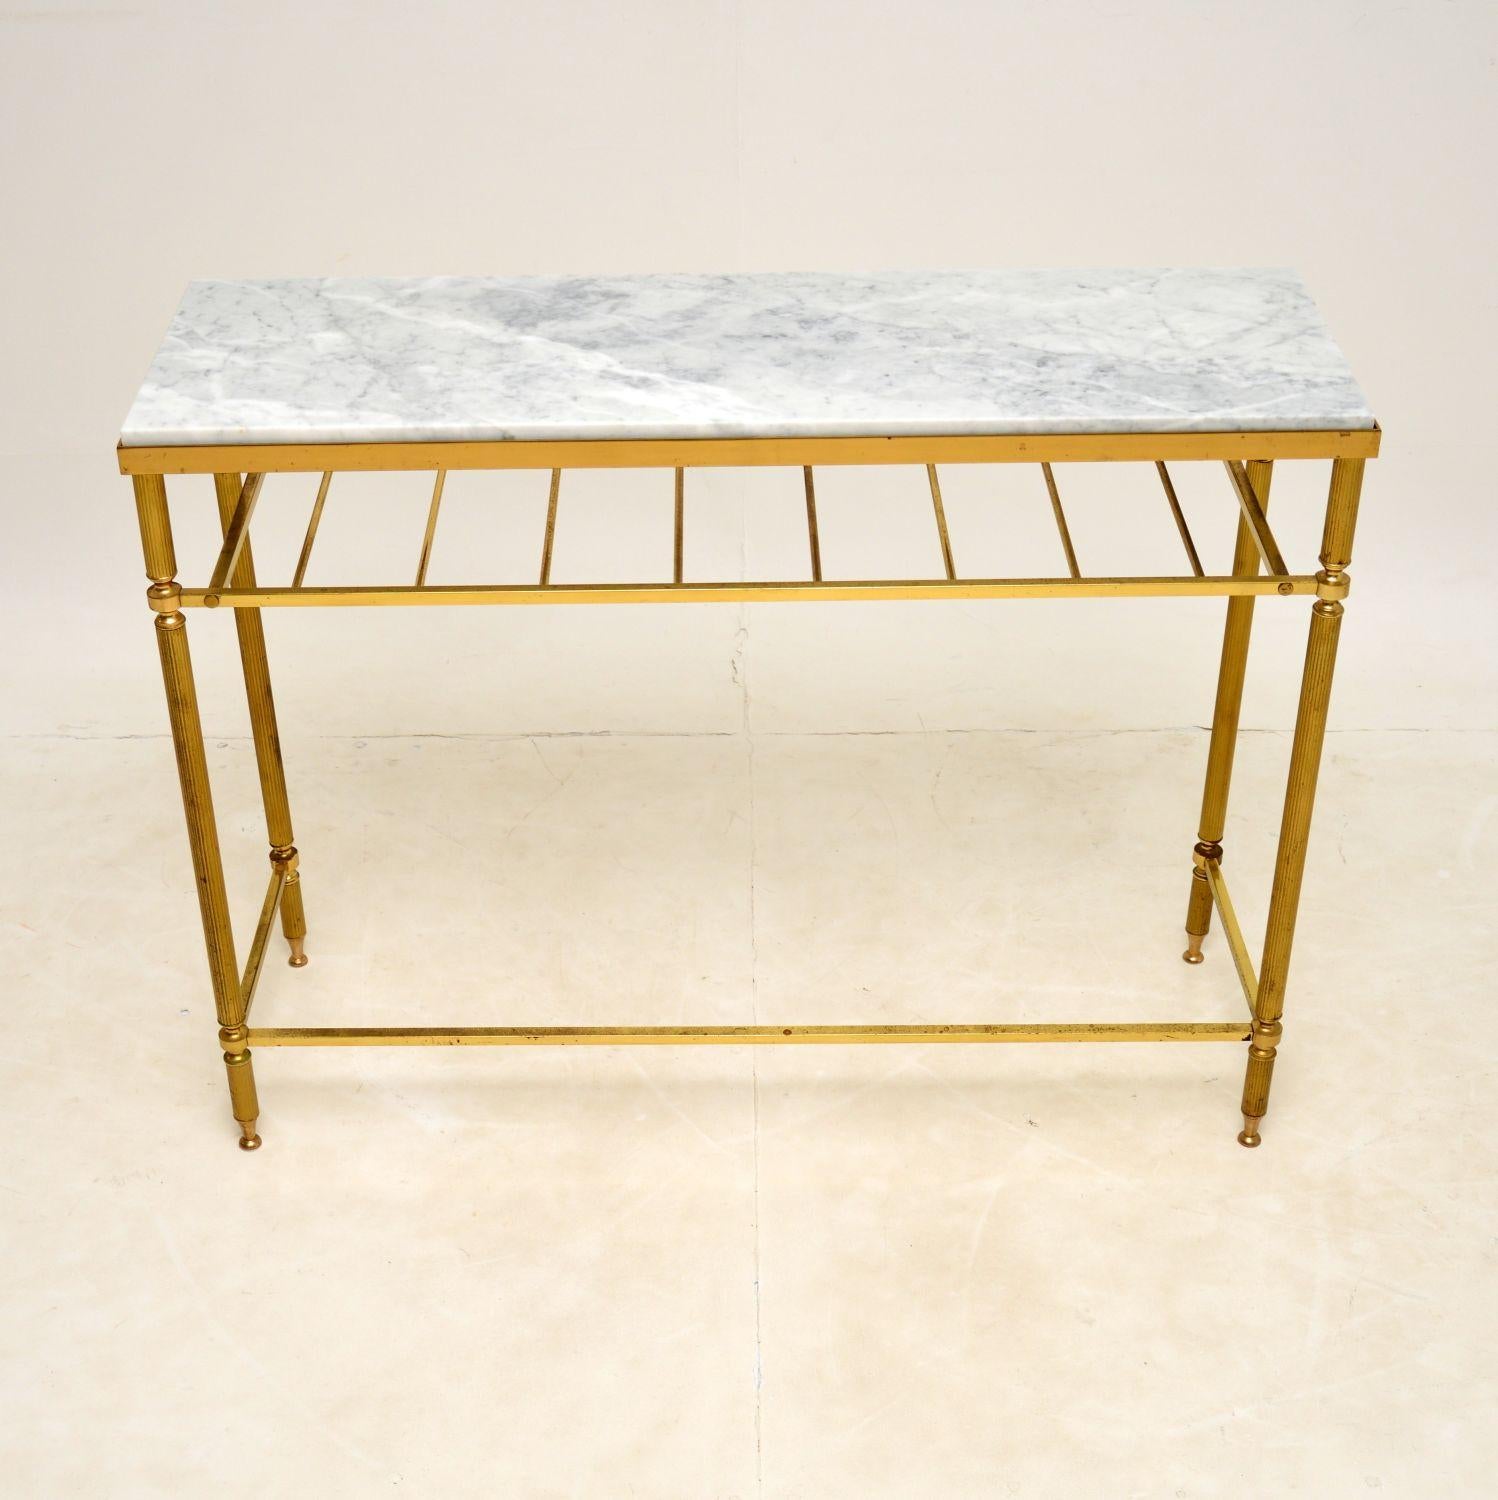 A stunning vintage console table with a solid brass frame and marble top. This was made in France, it dates from around the 1960’s.

It is very well made, with beautifully fluted legs and a stretchered base. We have had the white marble top newly